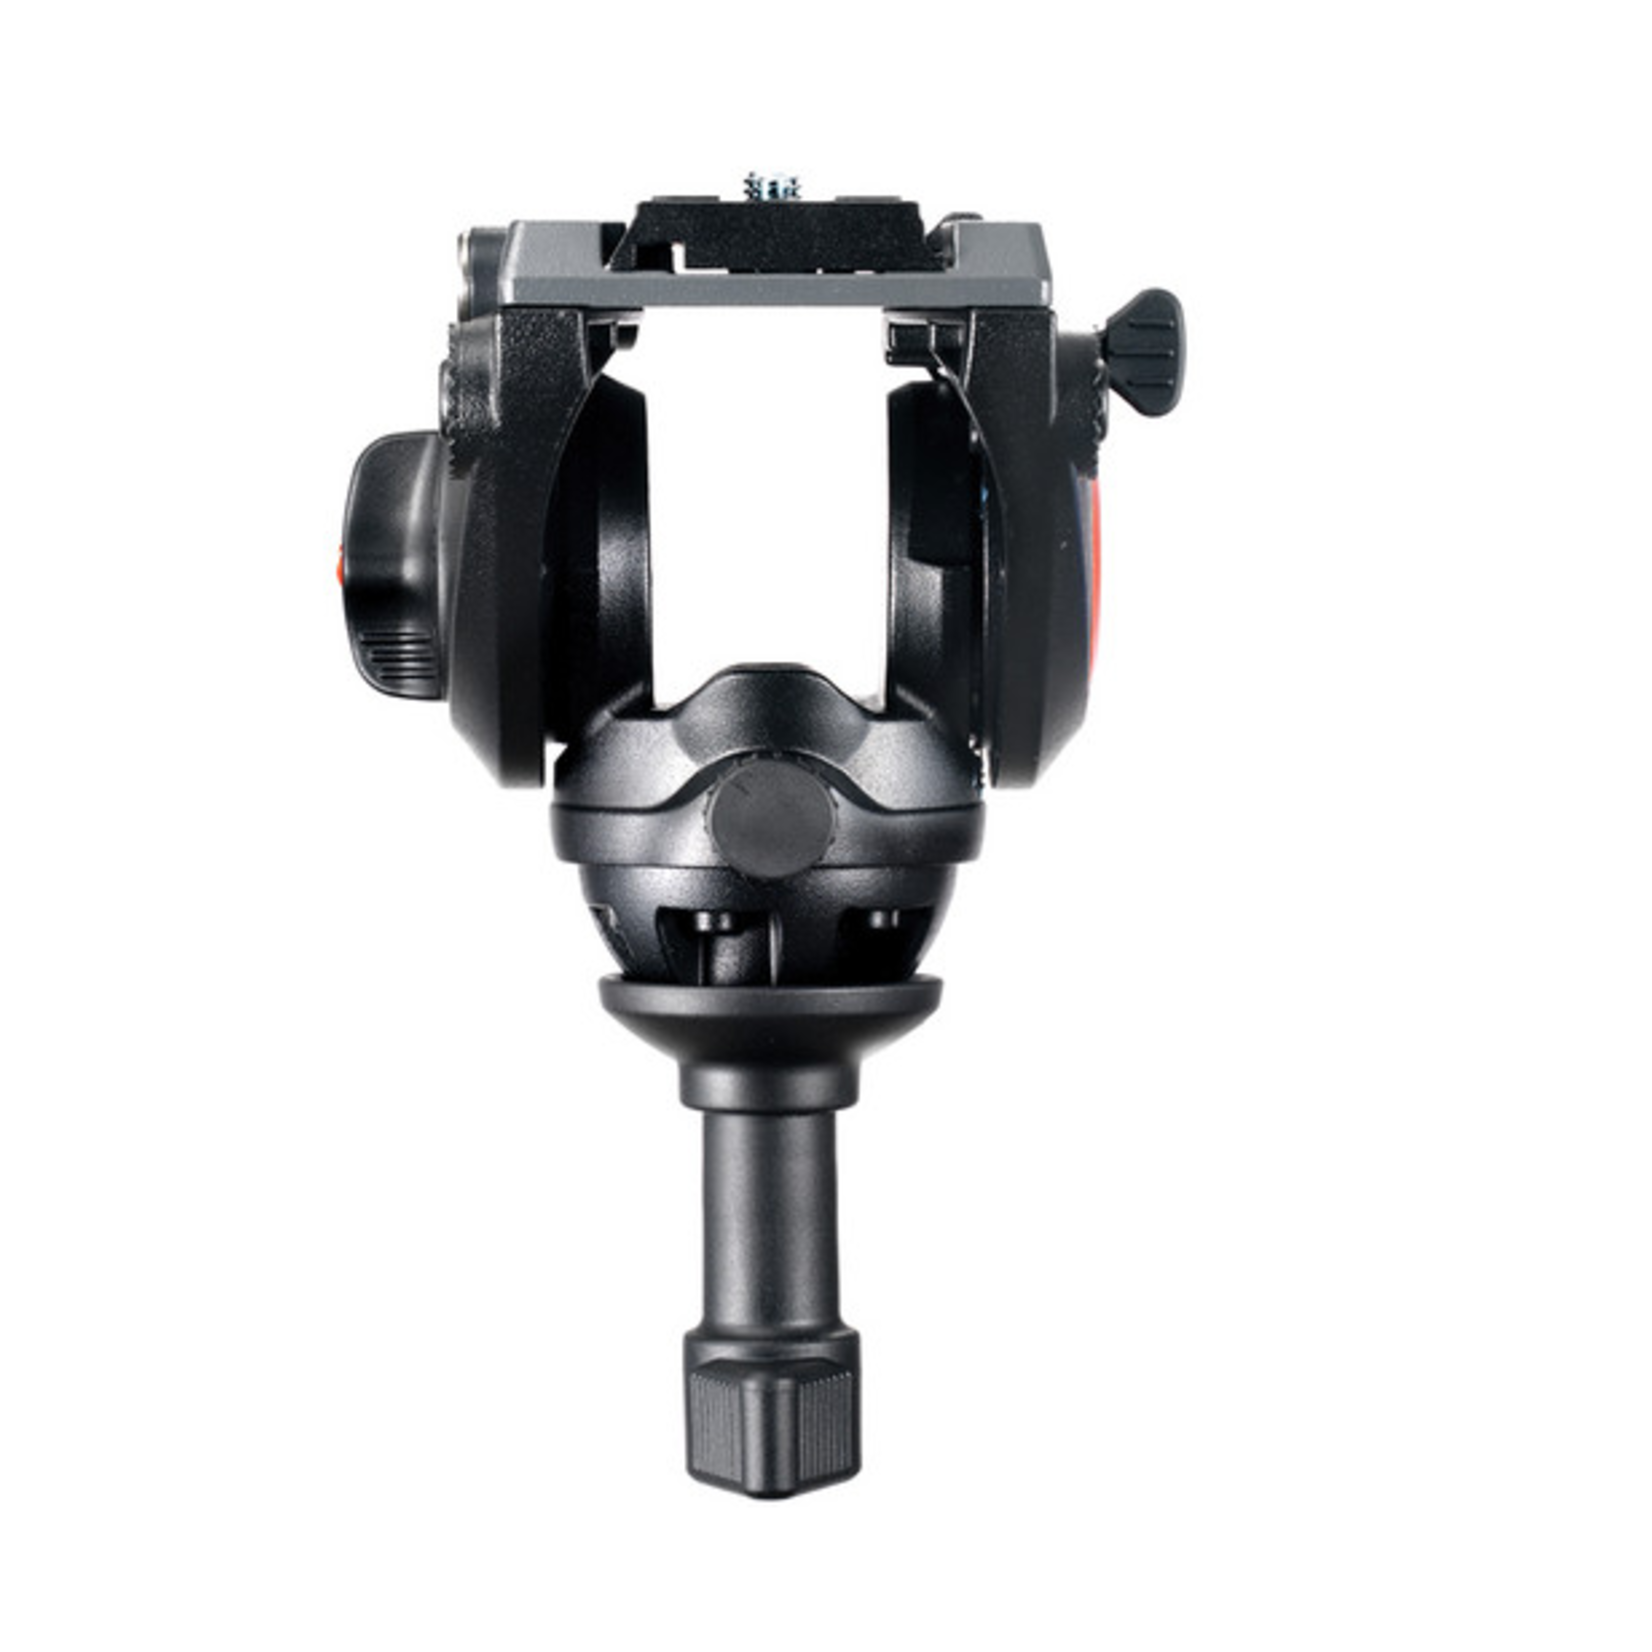 Manfrotto Manfrotto MVH500A Fluid Drag Video Head with MVT502AM Tripod and Carry Bag